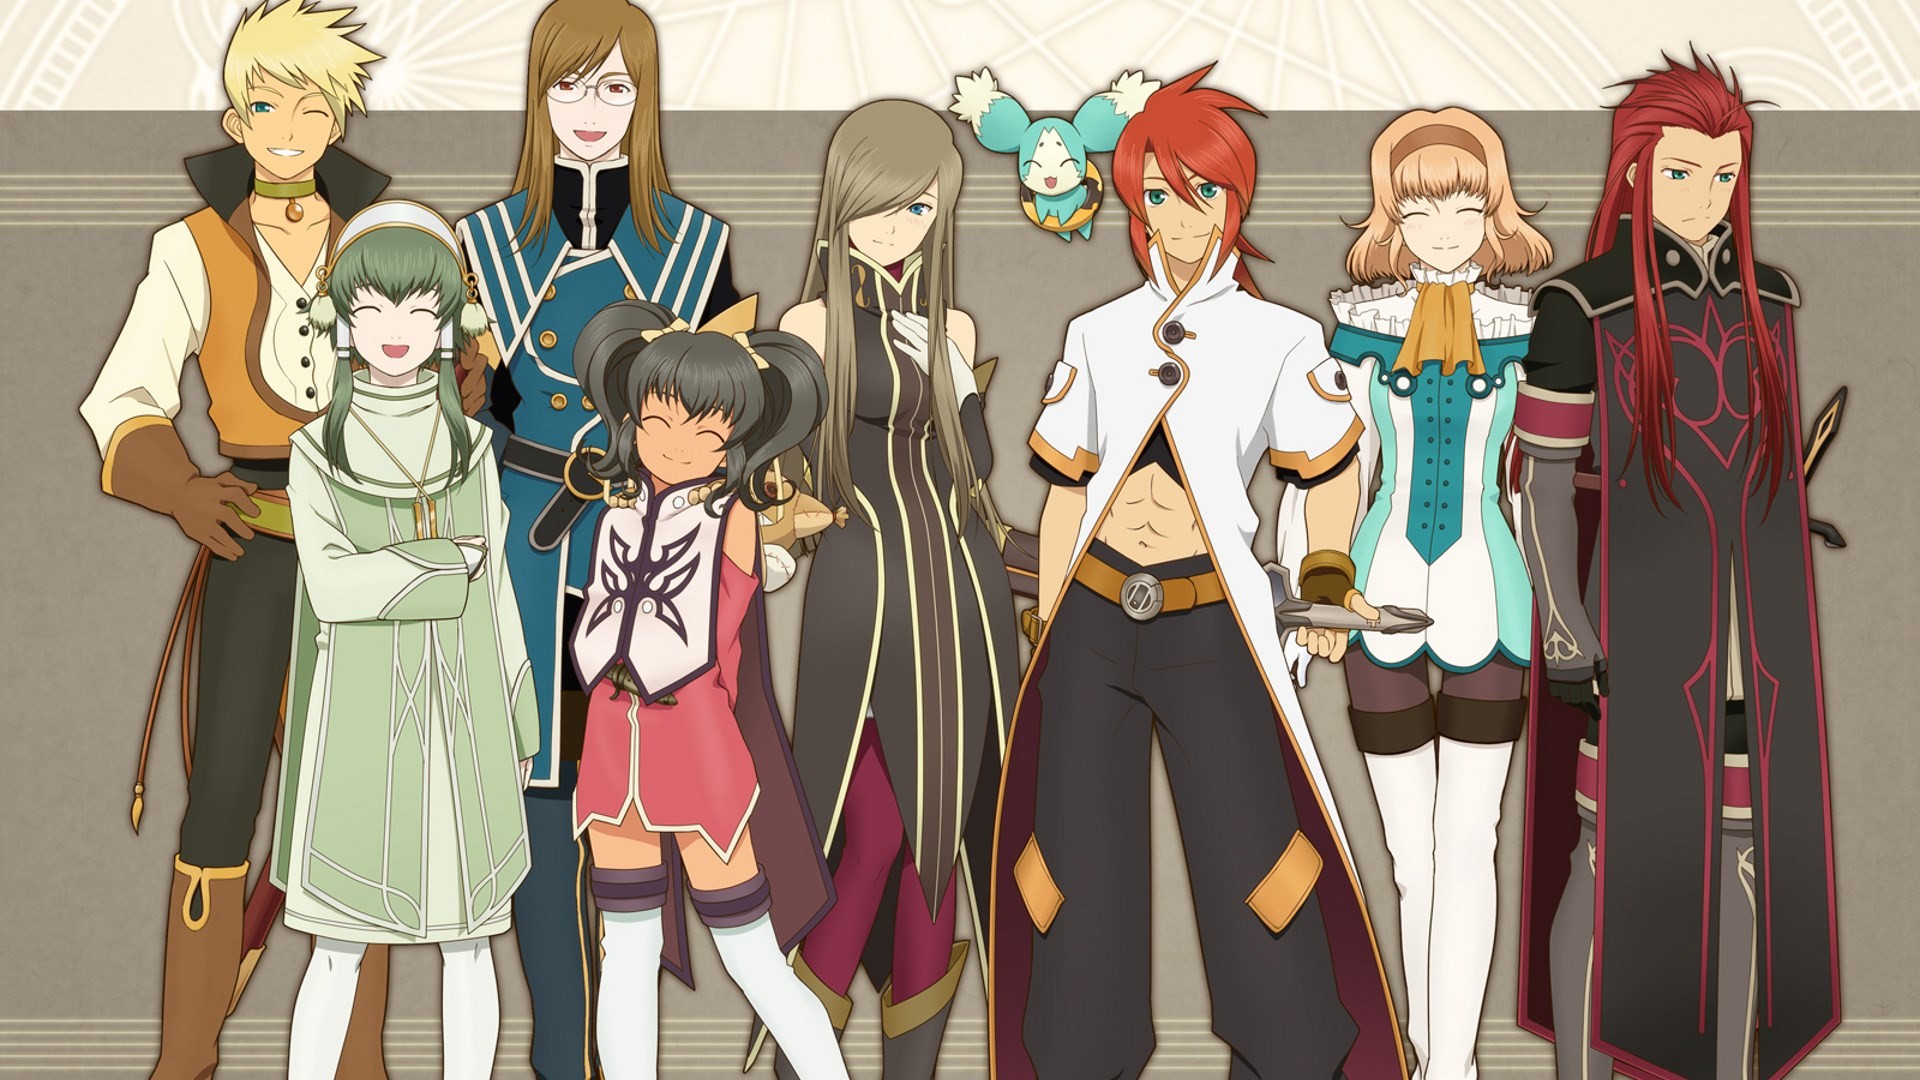 1920x1080 free high resolution wallpaper tales of the abyss